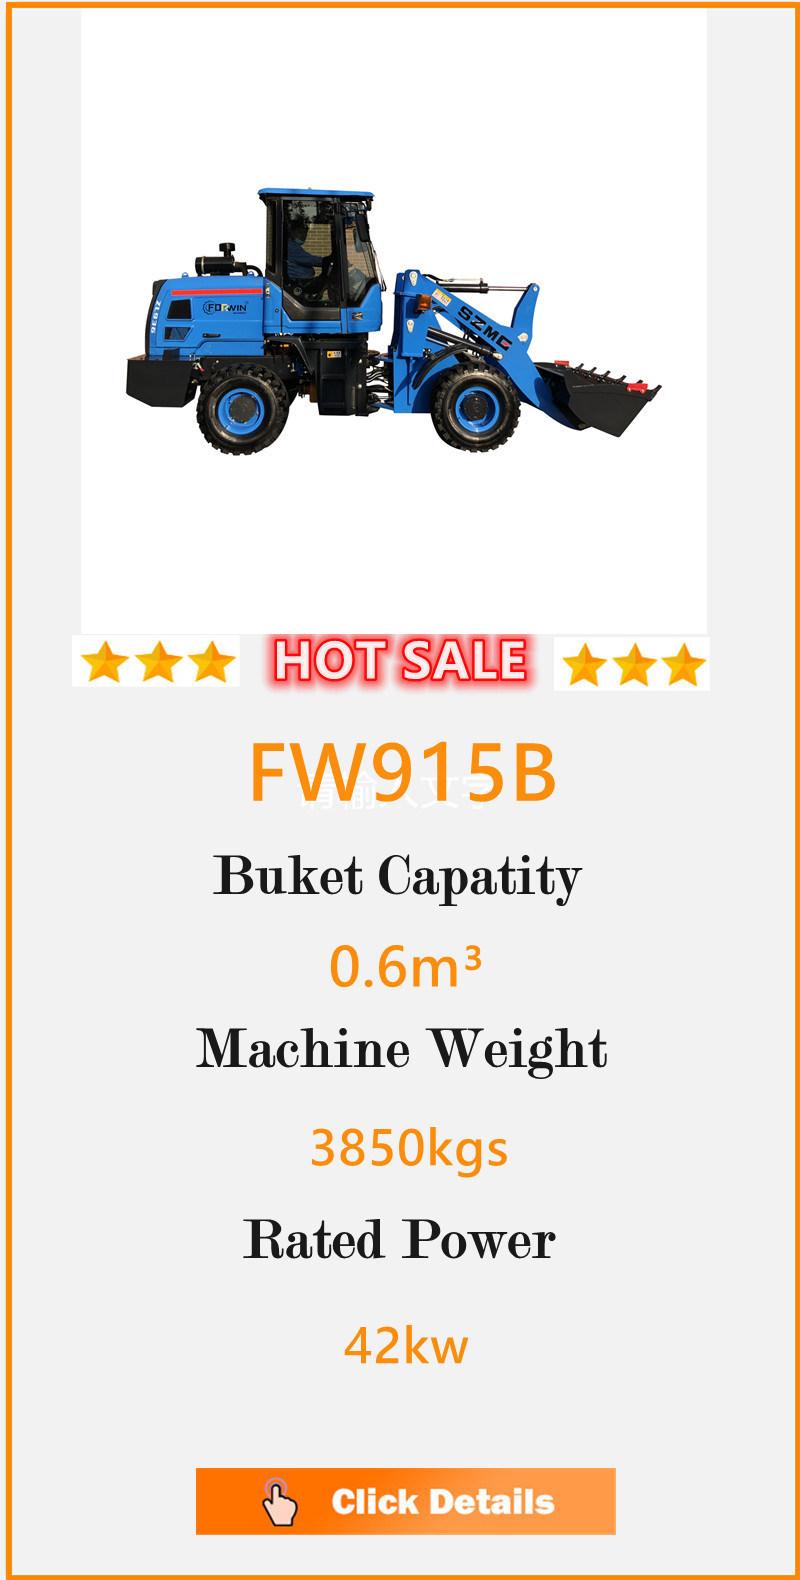 Factory Directly Sells 5 Ton Articulated Single Shovel Hydraulic Large Wheel Loader for Engineering Construction and Road Repair